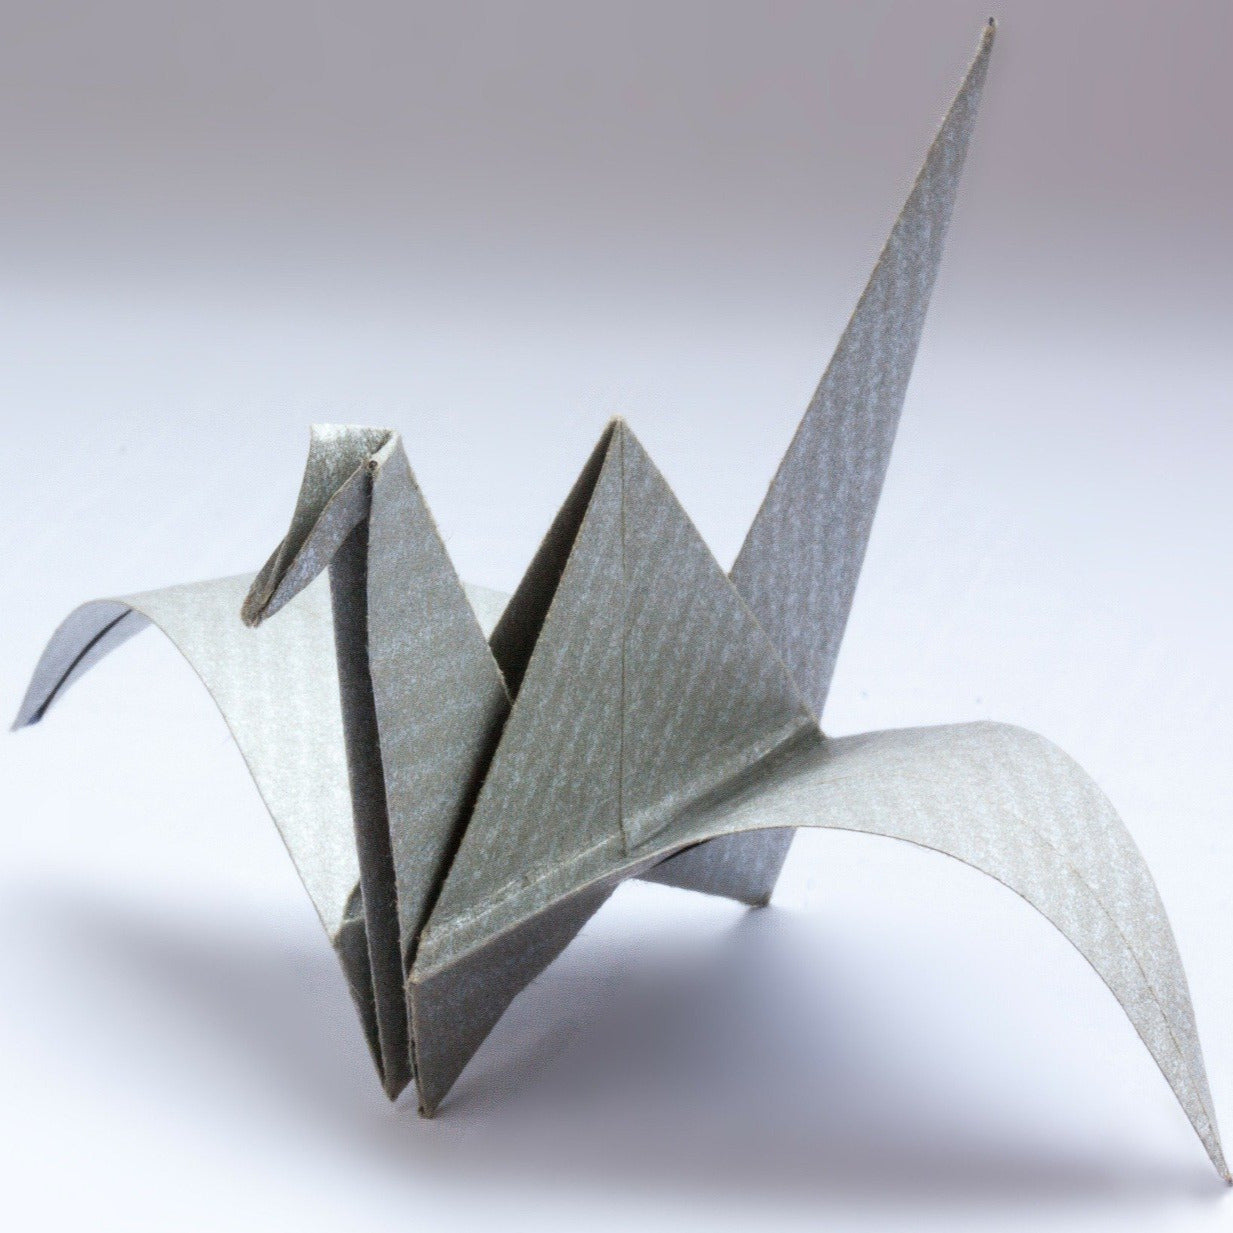 Fine Arts, Online Classes, Origami, Drawing and Painting, Course for Beginners